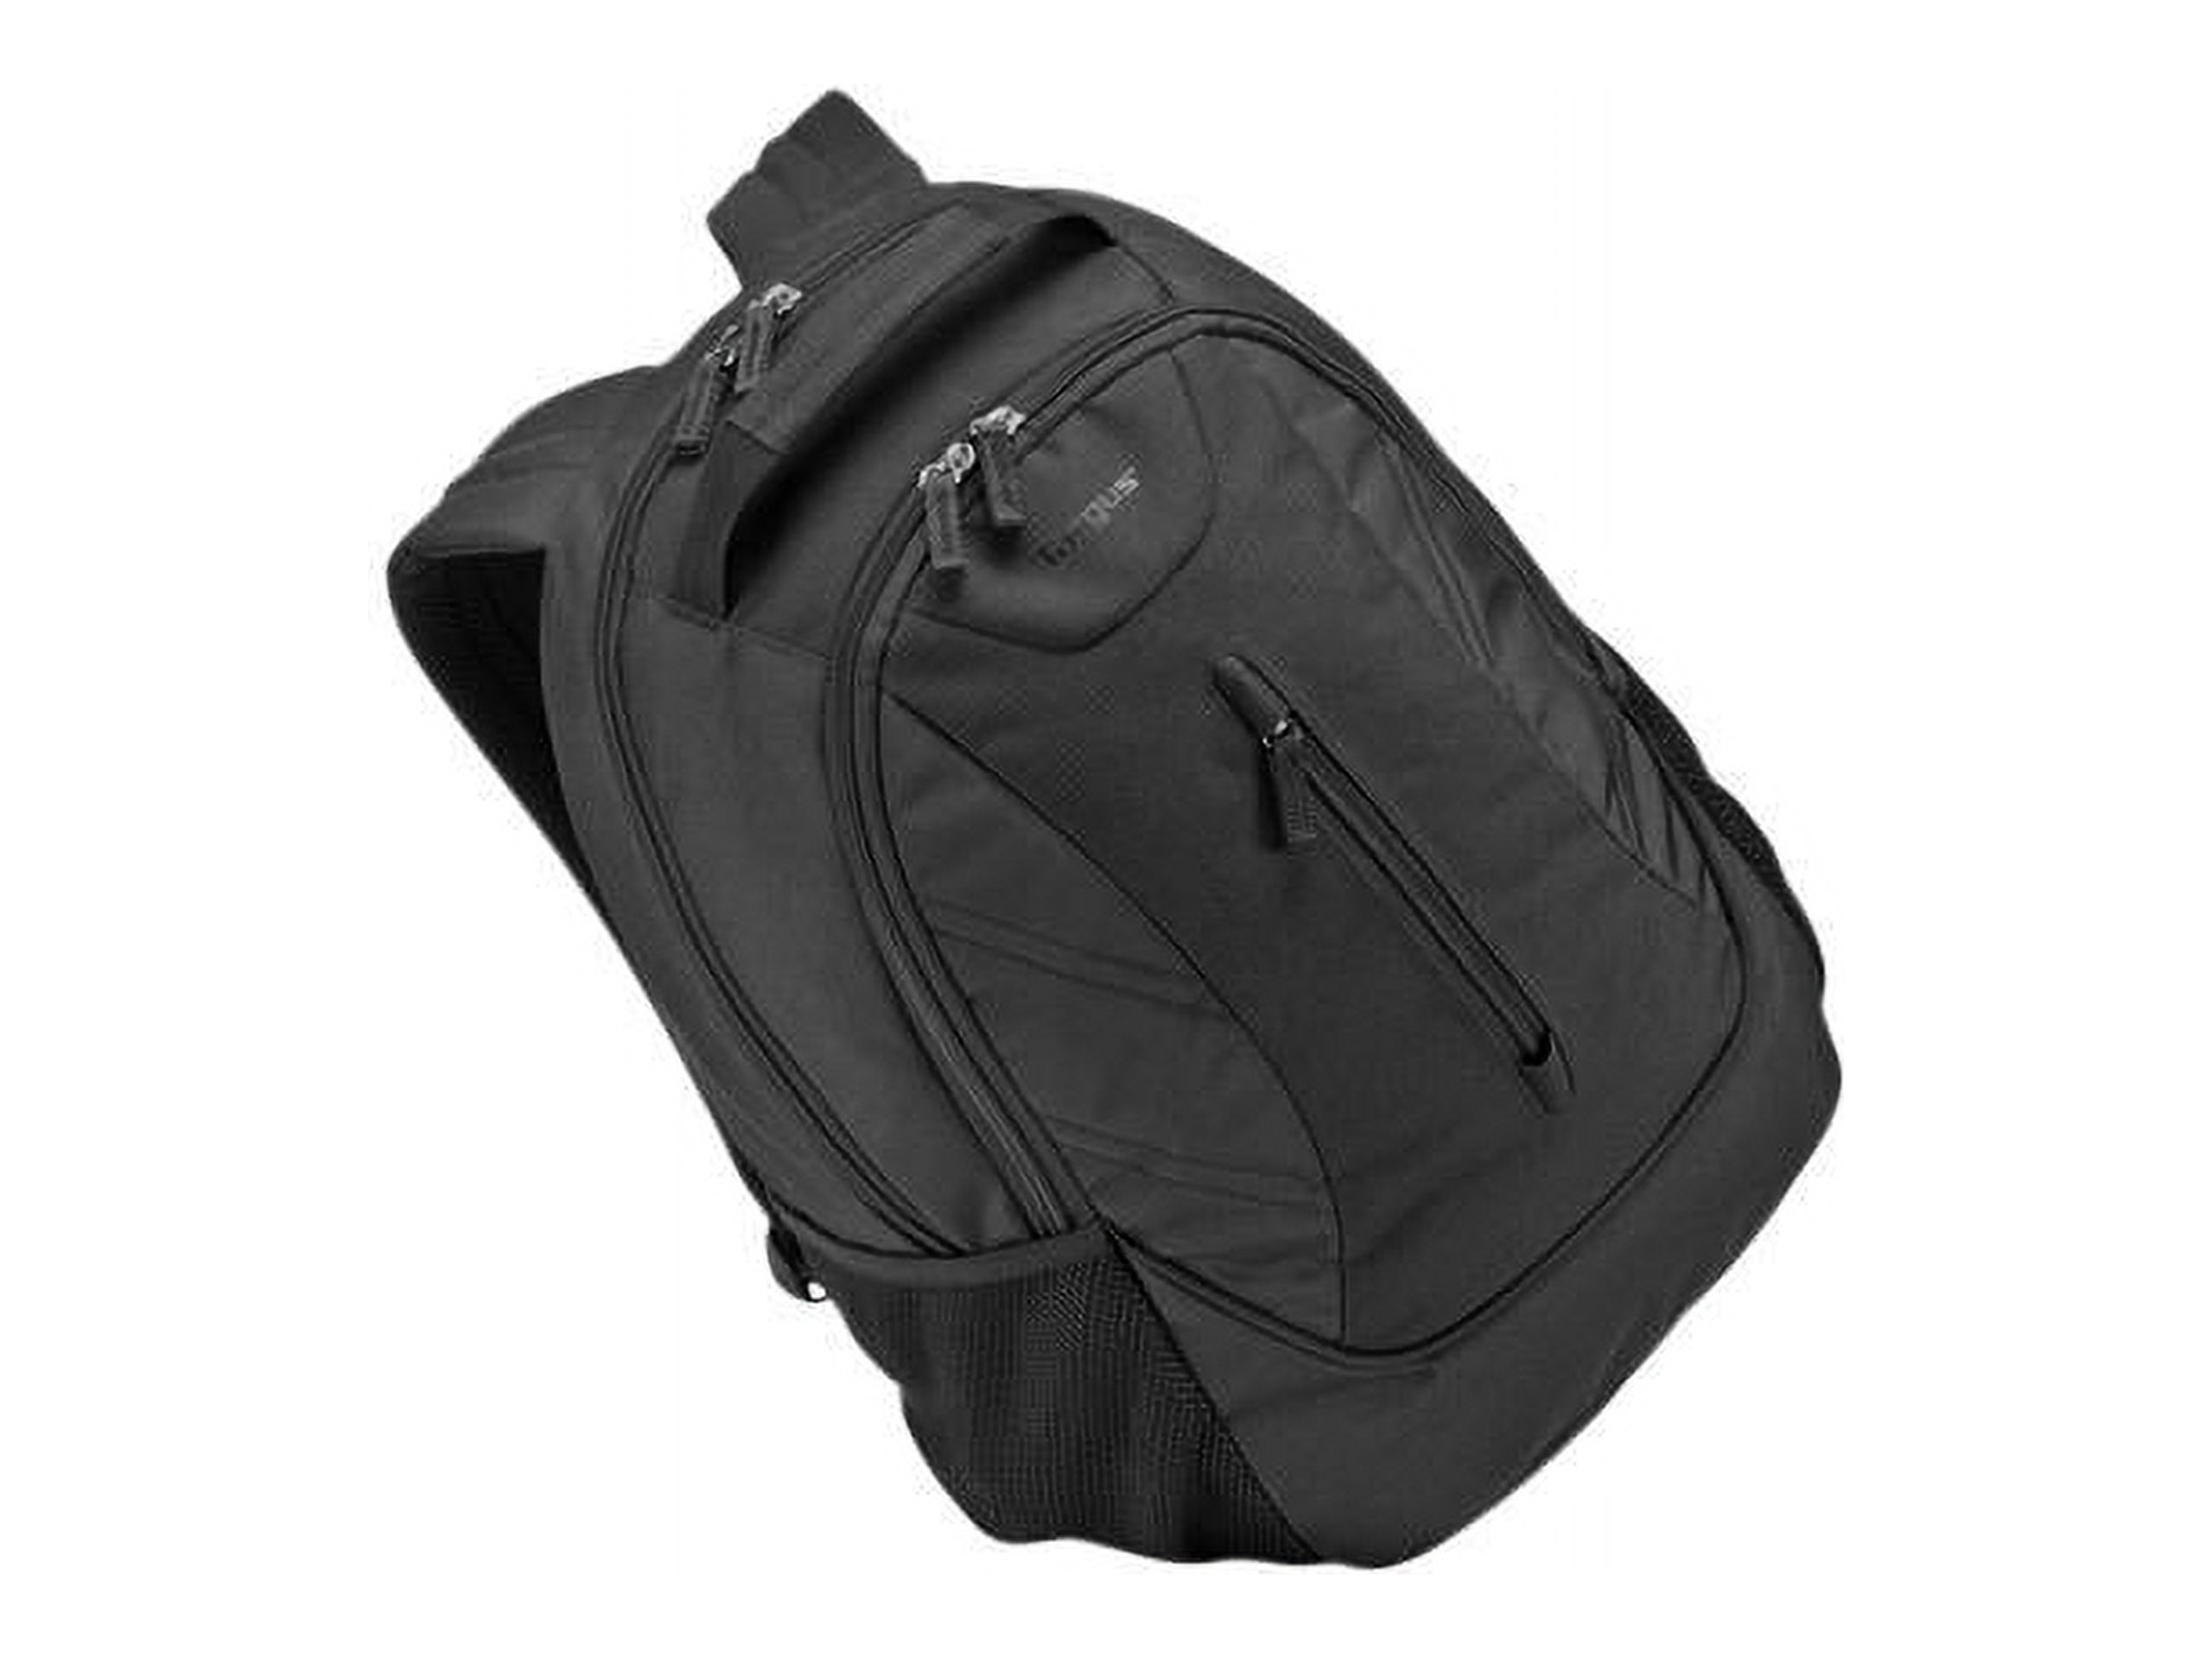 Targus Ascend TSB710US Carrying Case (Backpack) for 16 Notebook - Black - image 2 of 3